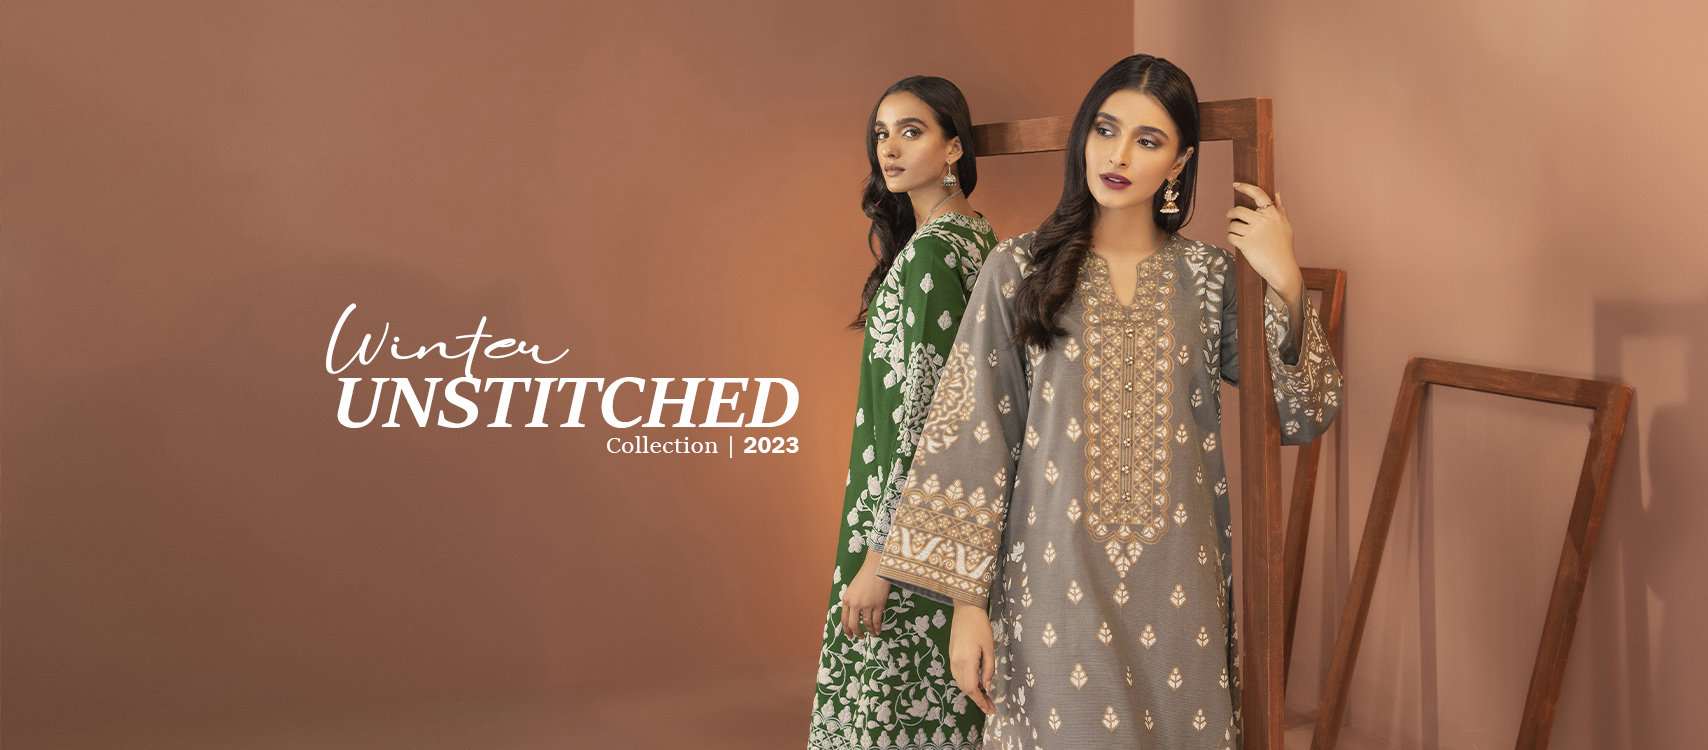 Limelight Winter collection 2023 Unstitched dresses